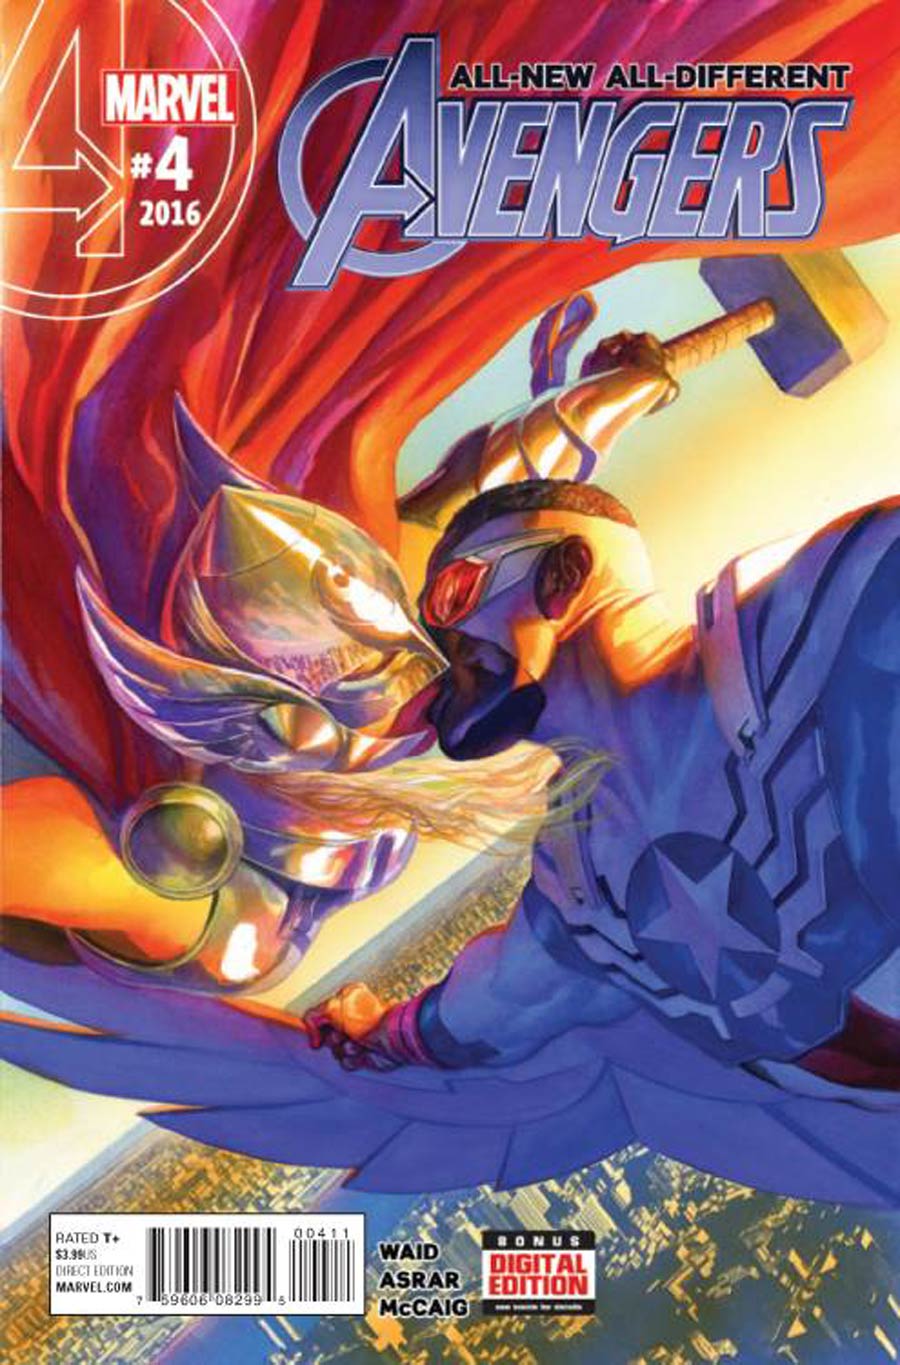 All-New All-Different Avengers #4 Cover A 1st Ptg Regular Alex Ross Cover